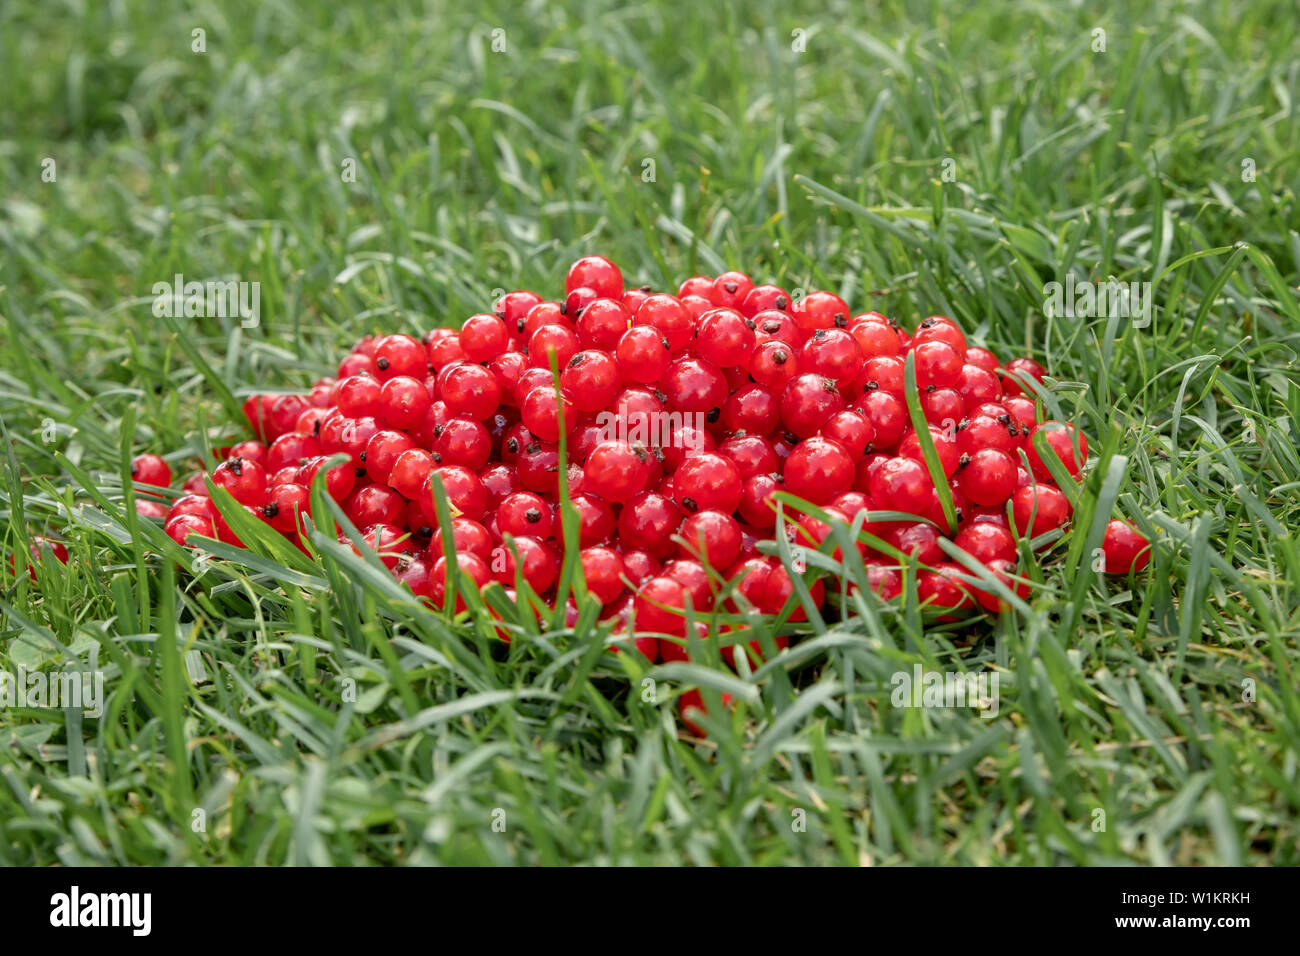 Description: red currant in bulk lies on the green grass Stock Photo